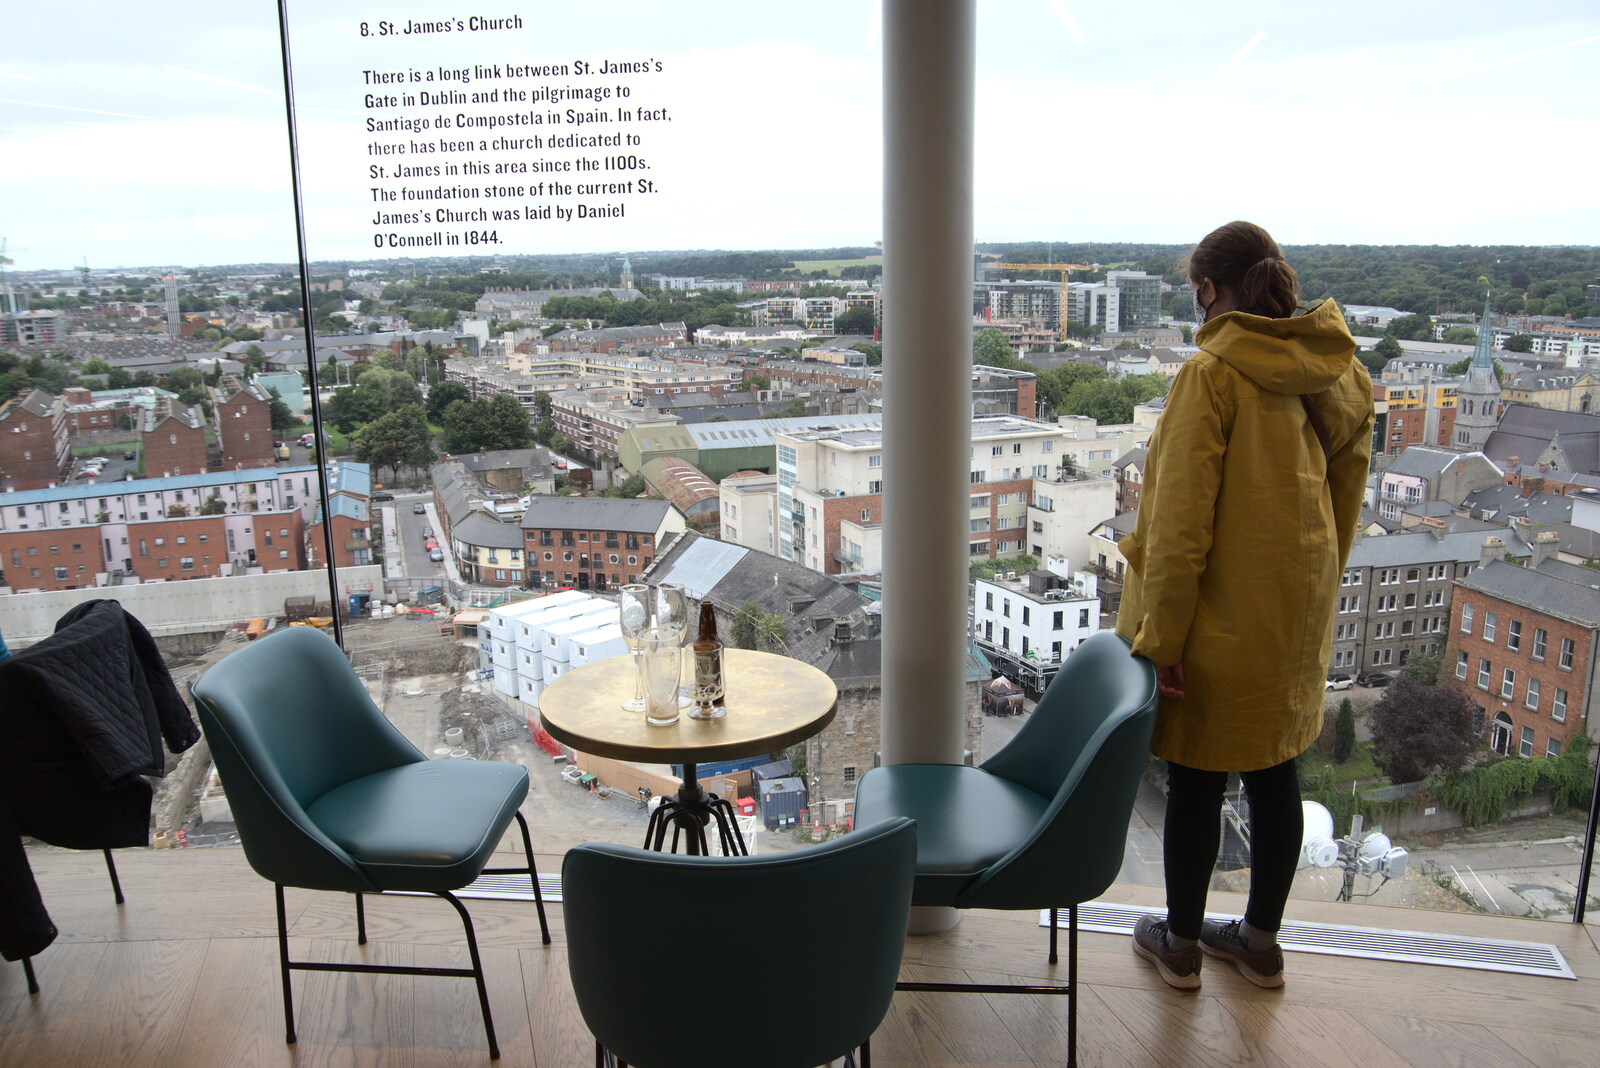 Isobel looks out over the city from The Guinness Storehouse Tour, St. James's Gate, Dublin, Ireland - 17th August 2021